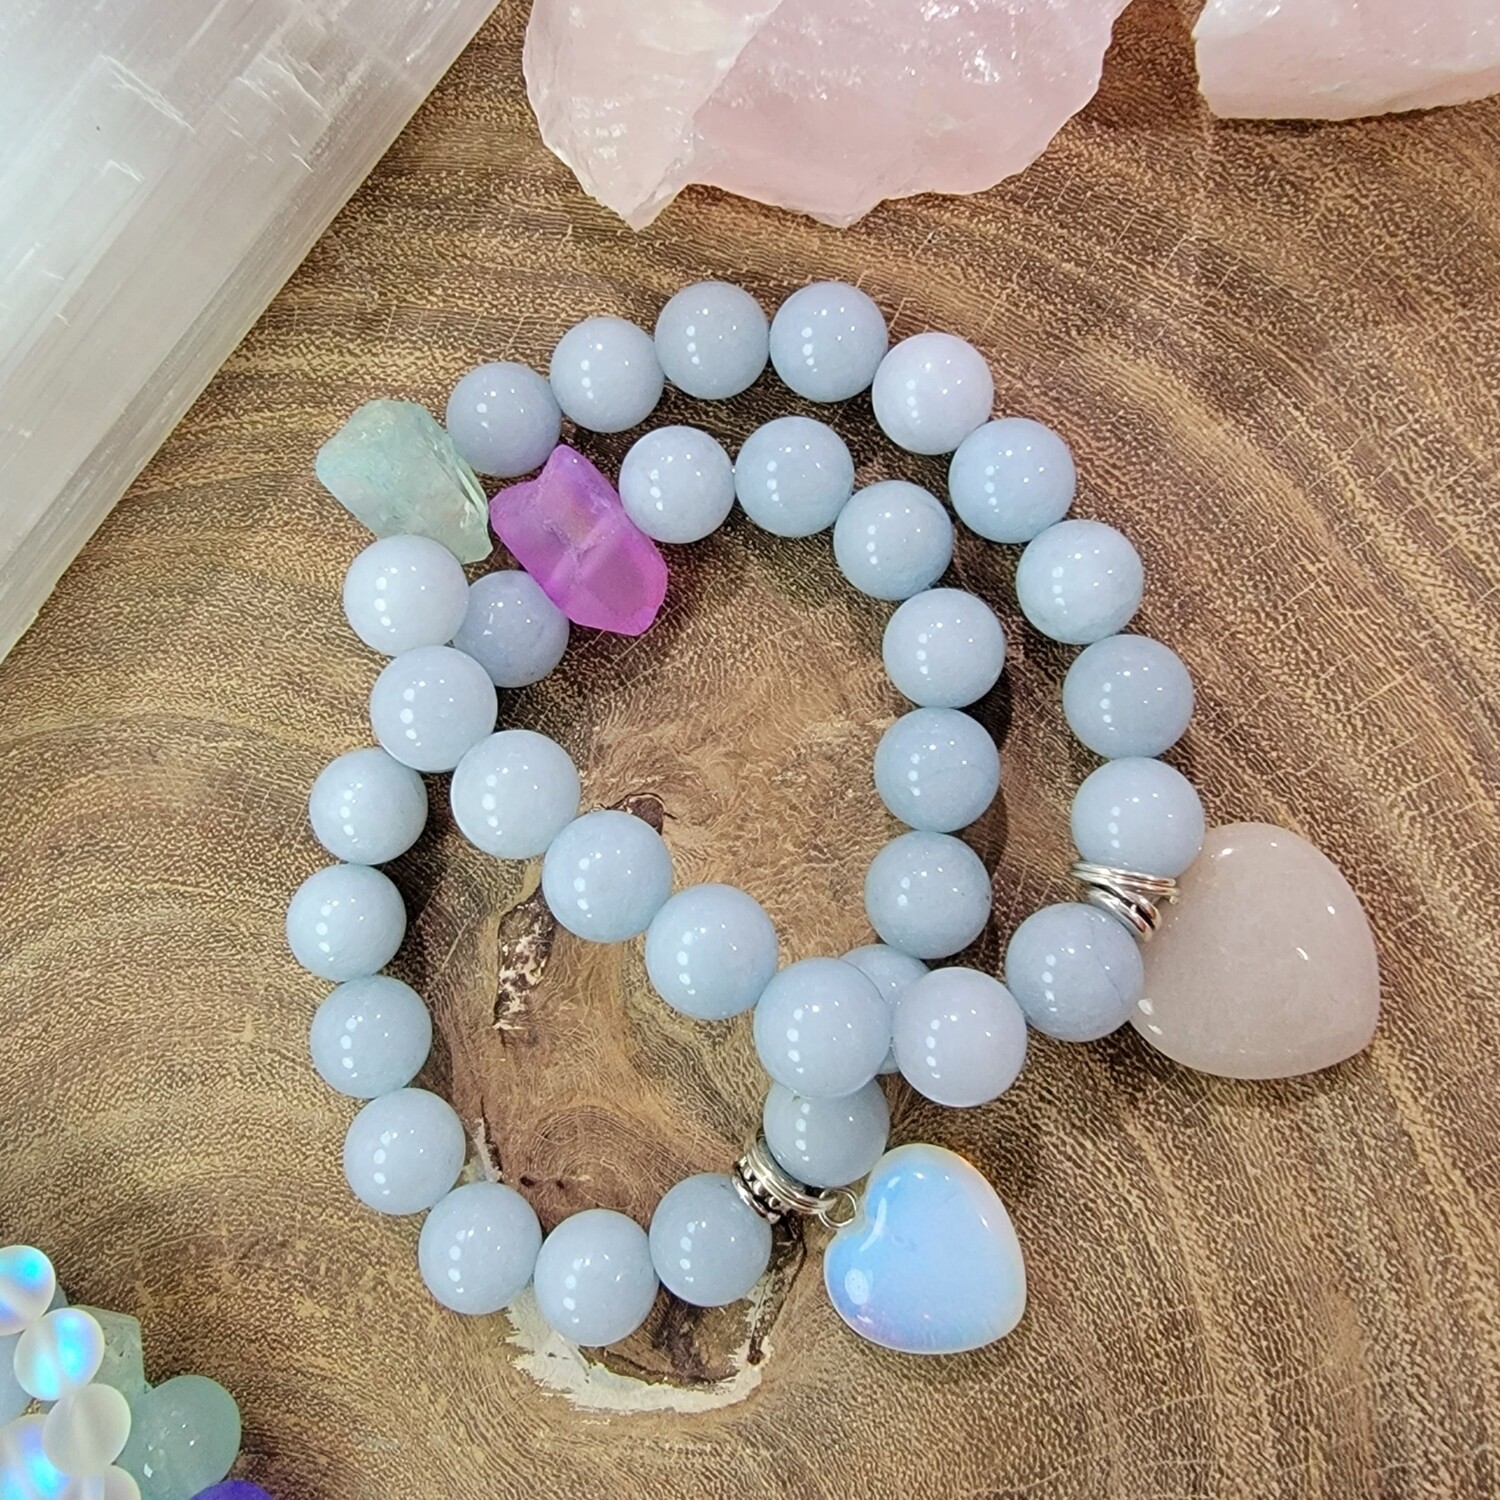 Aquamarine, clear quartz and rose quartz charms. Handcrafted bracelets with Raw focals - March birthstone. 